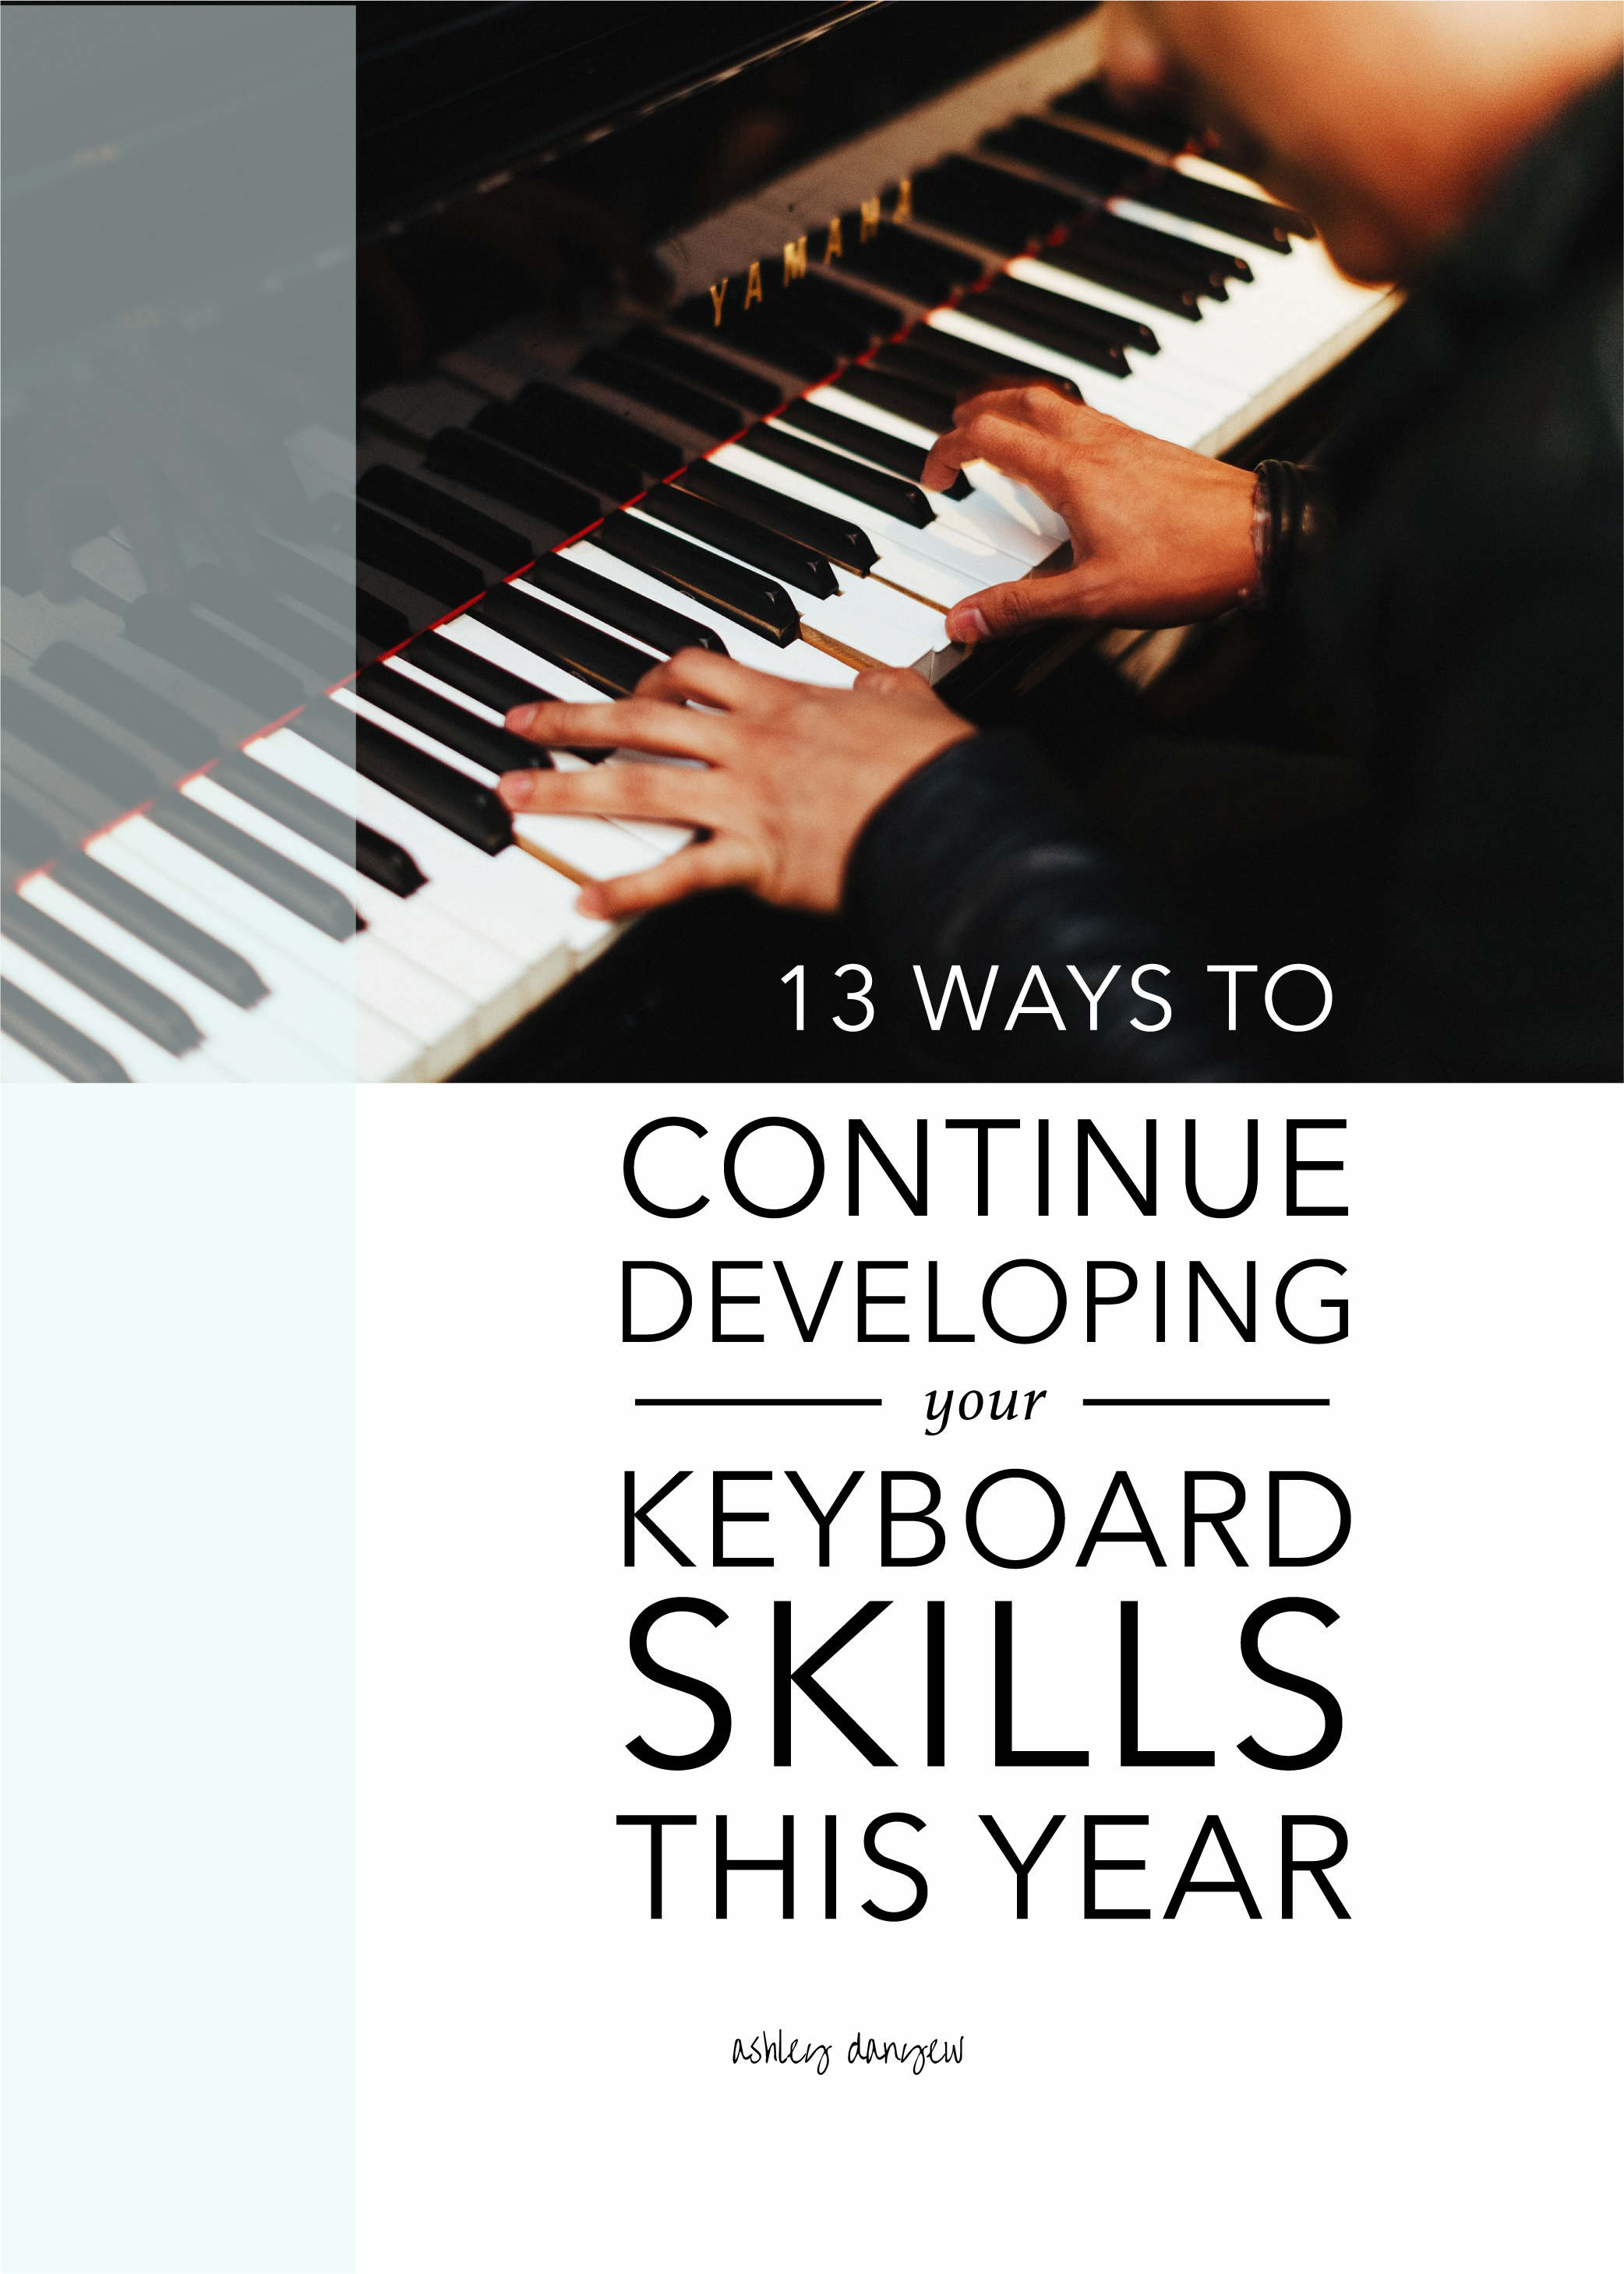 13 Ways to Continue Developing Your Keyboard Skills This Year